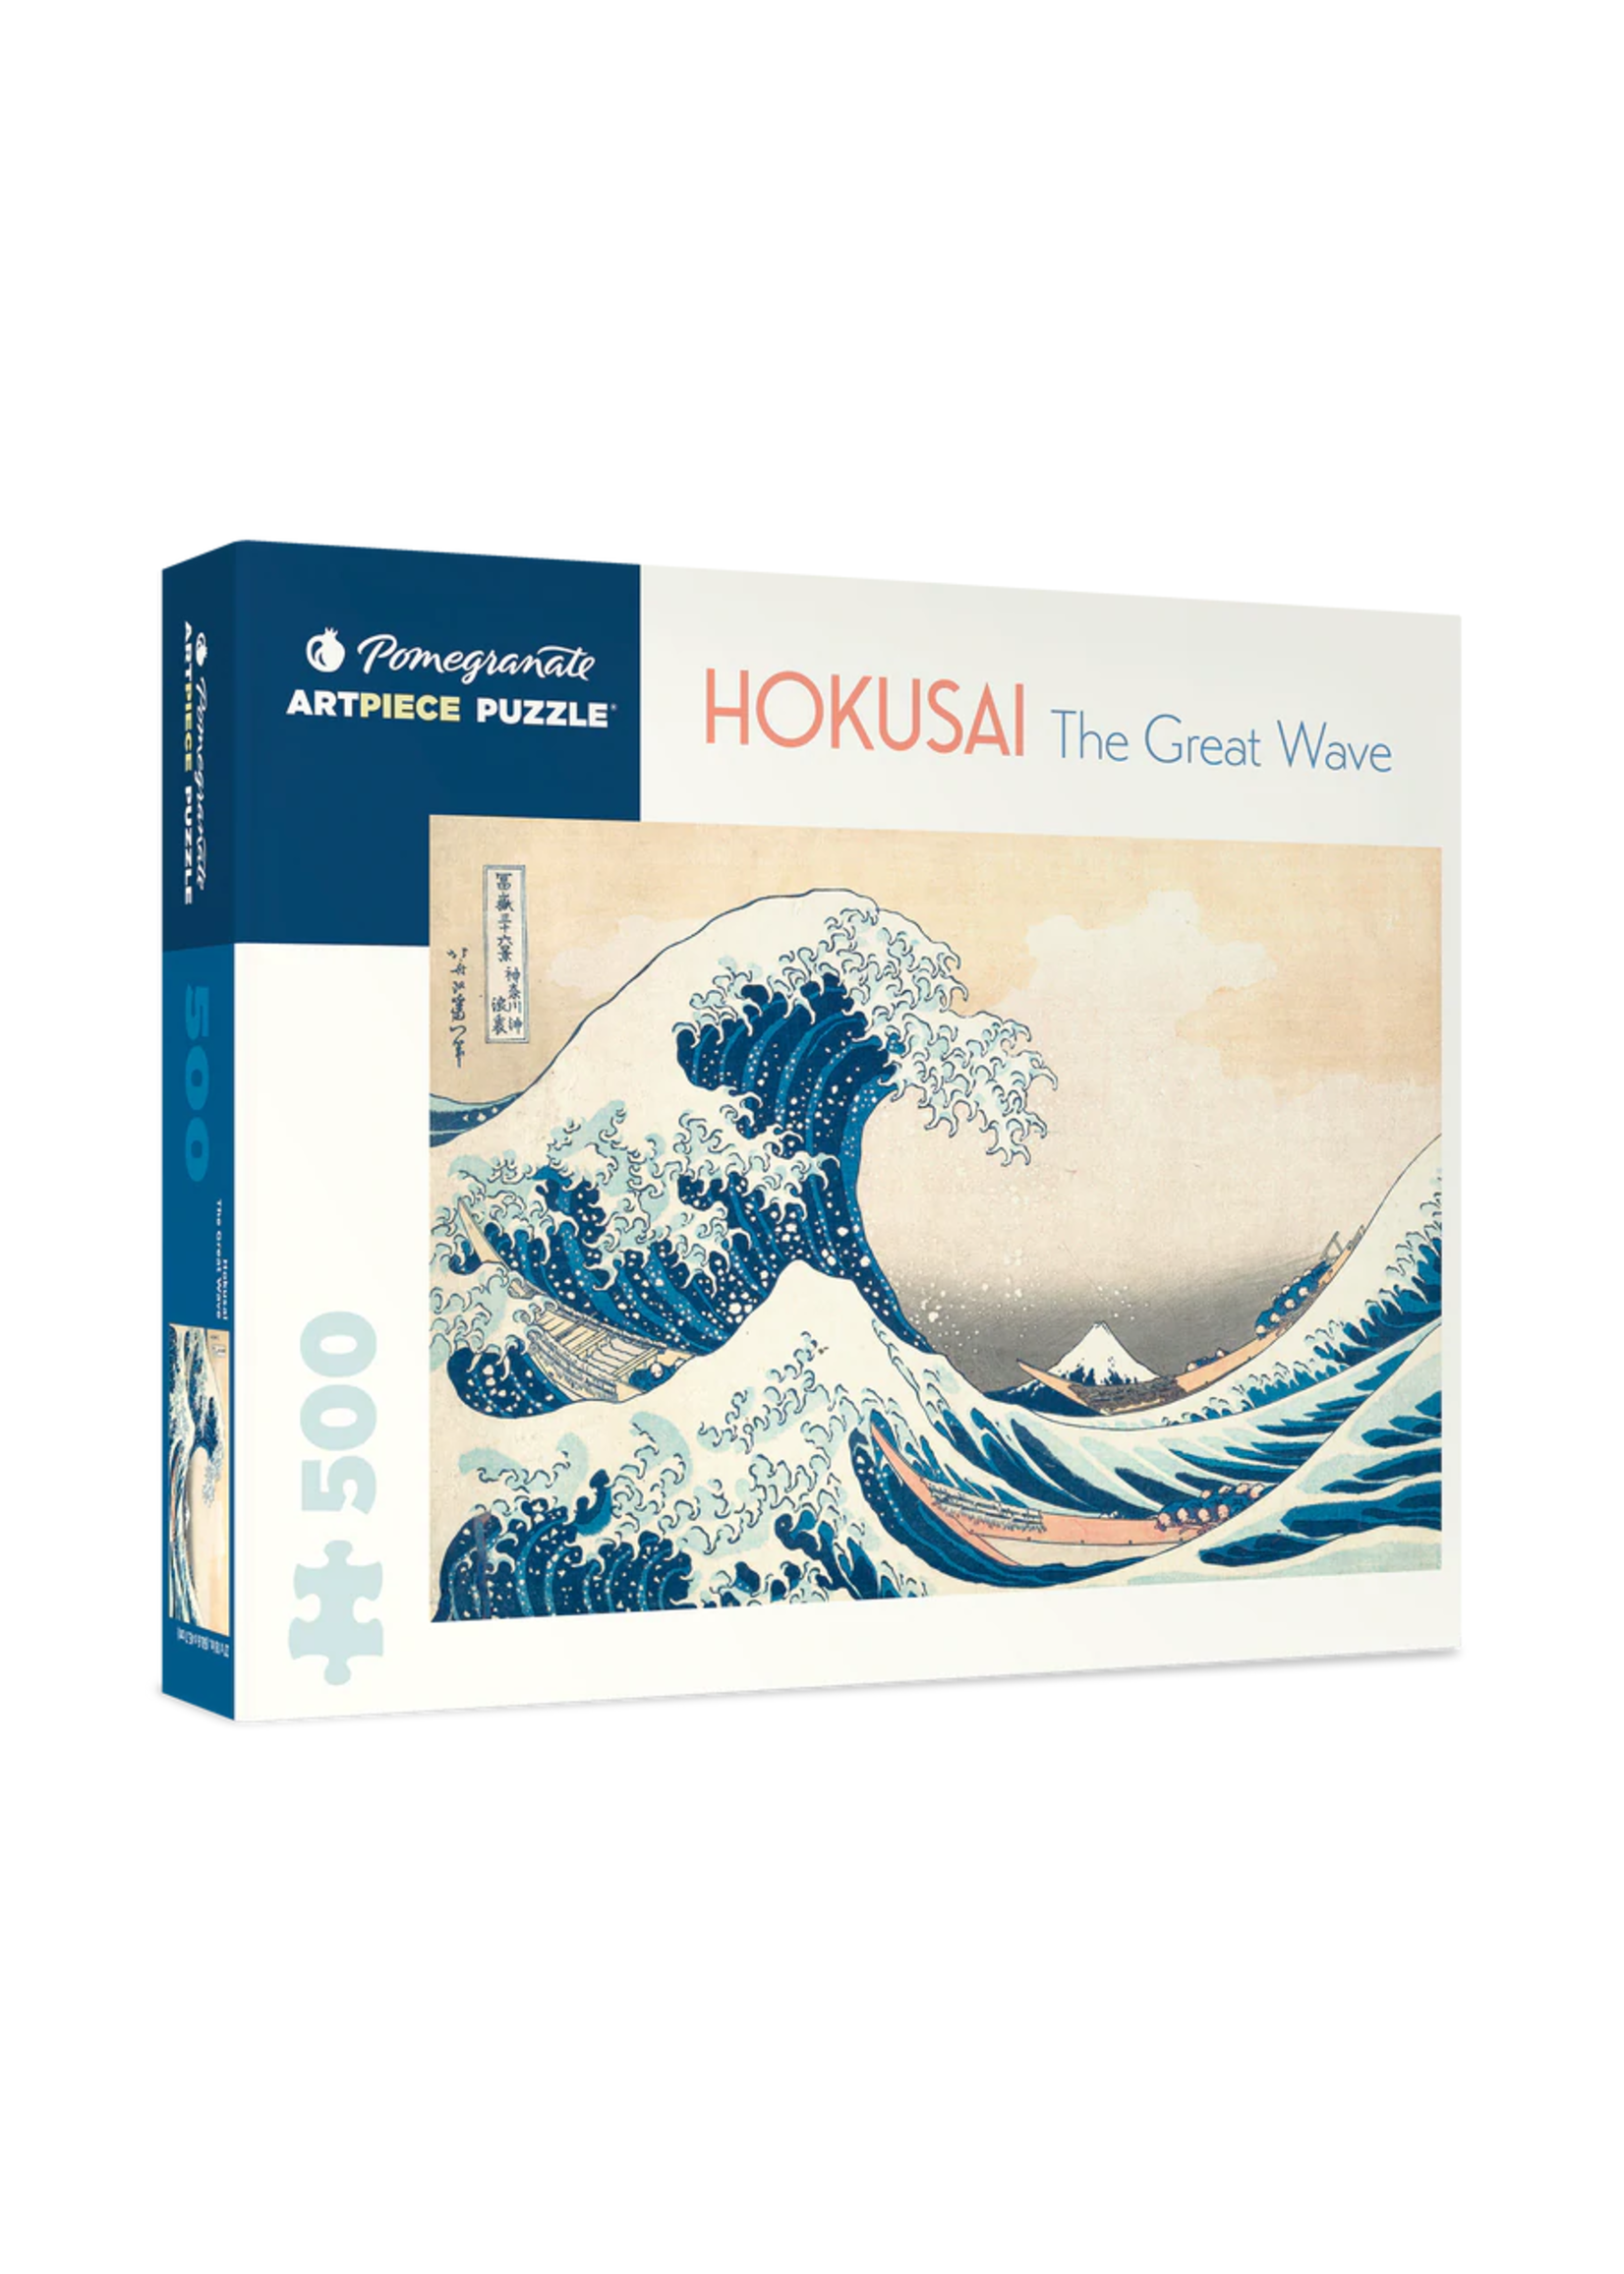 Pomegranate "The Great Wave" 500 Piece Puzzle